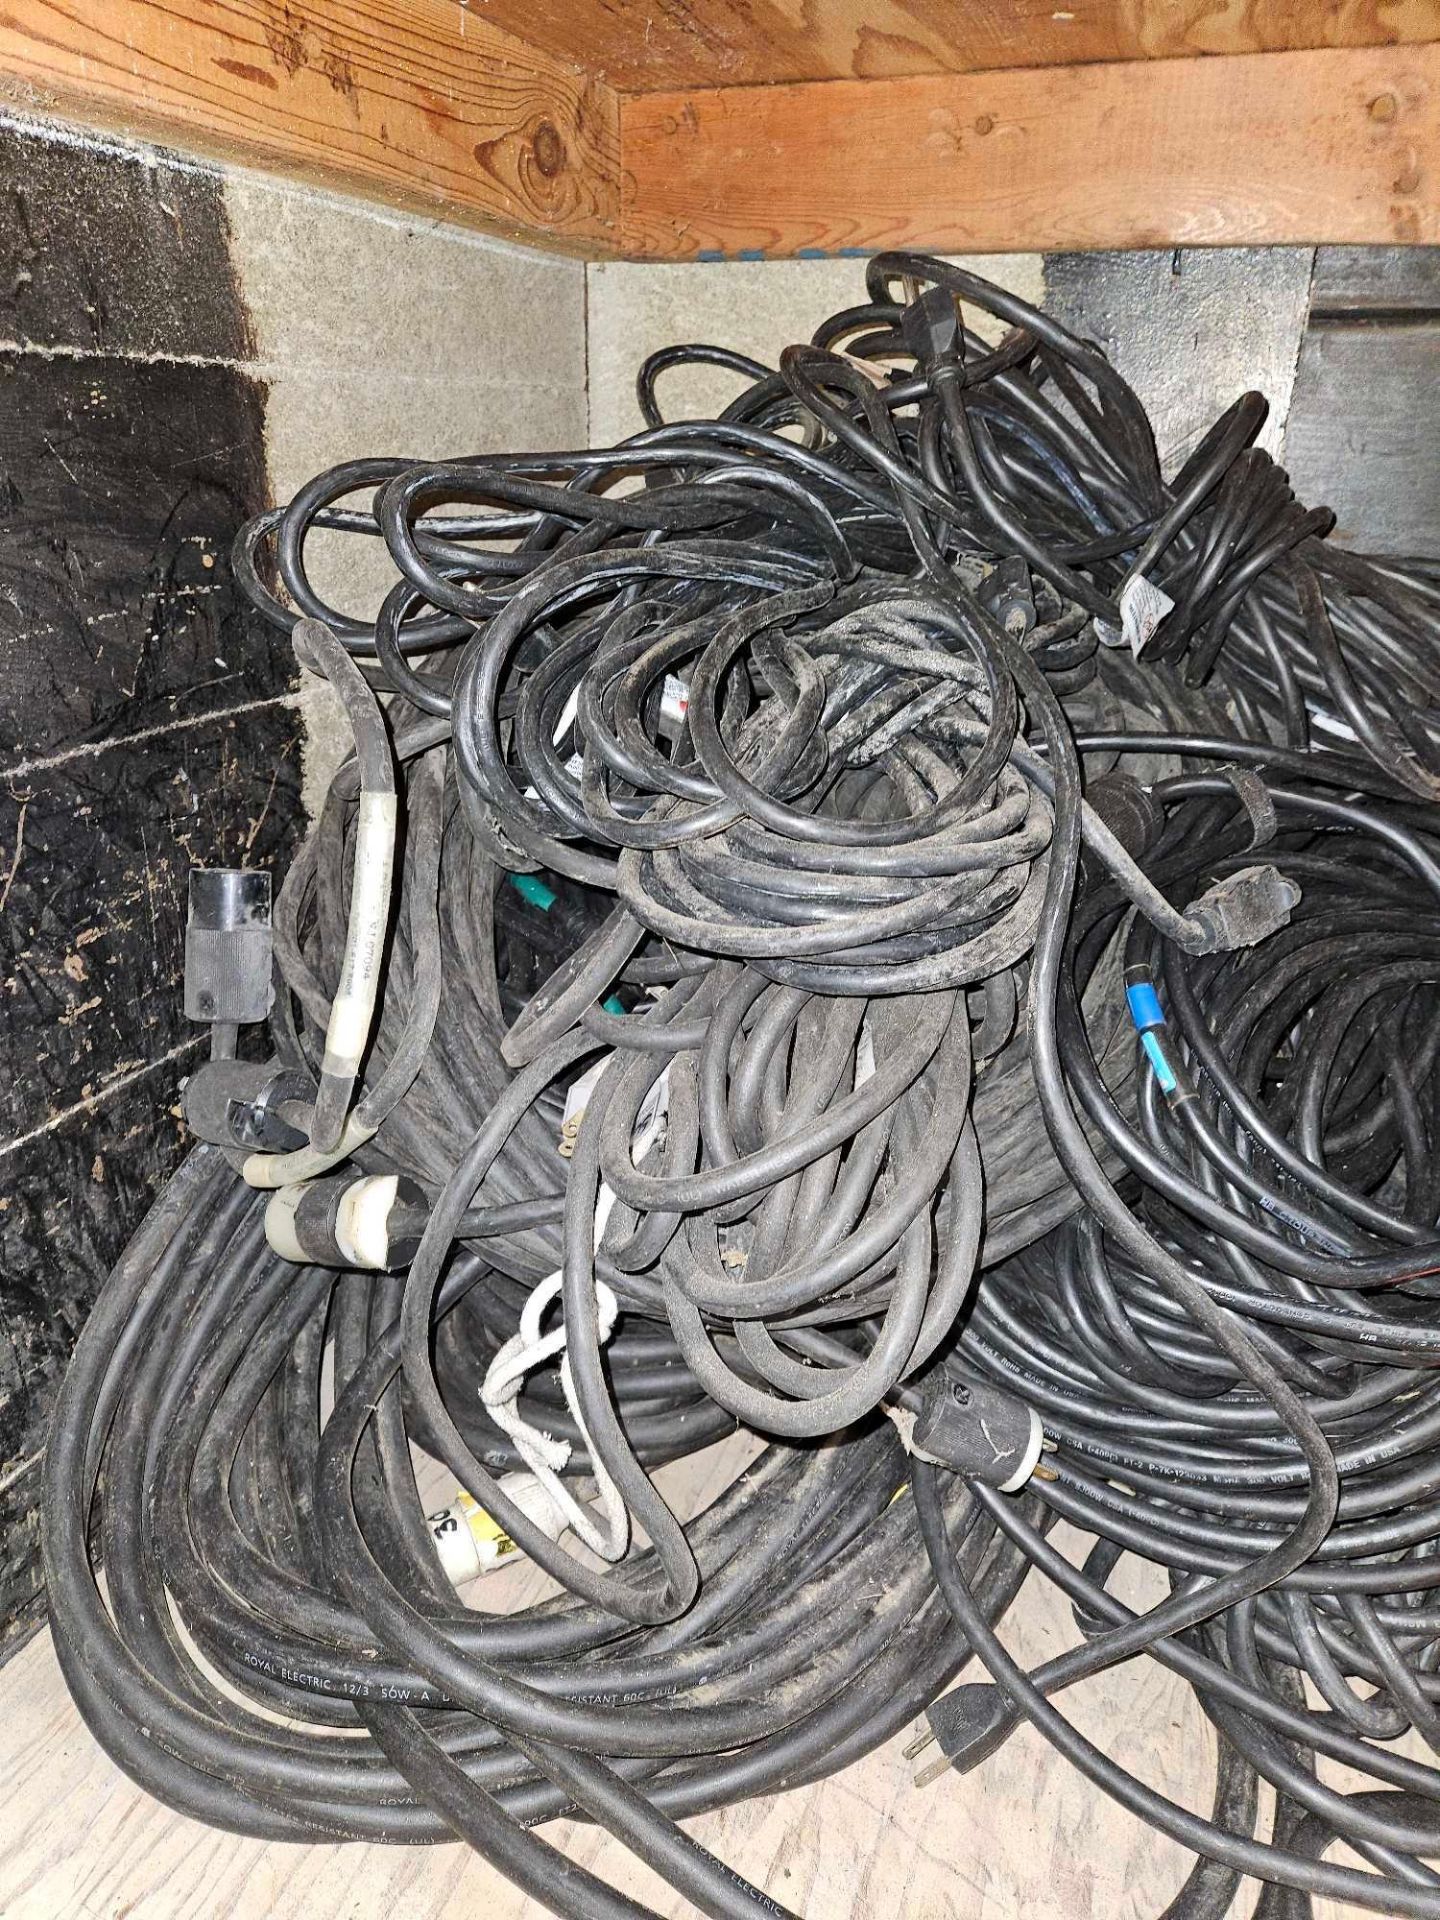 Lot of assorted 12/3 black extension cords with single tap, (2) 100ft, (1) 80ft, (4) 50ft, (30 40ft - Image 2 of 2